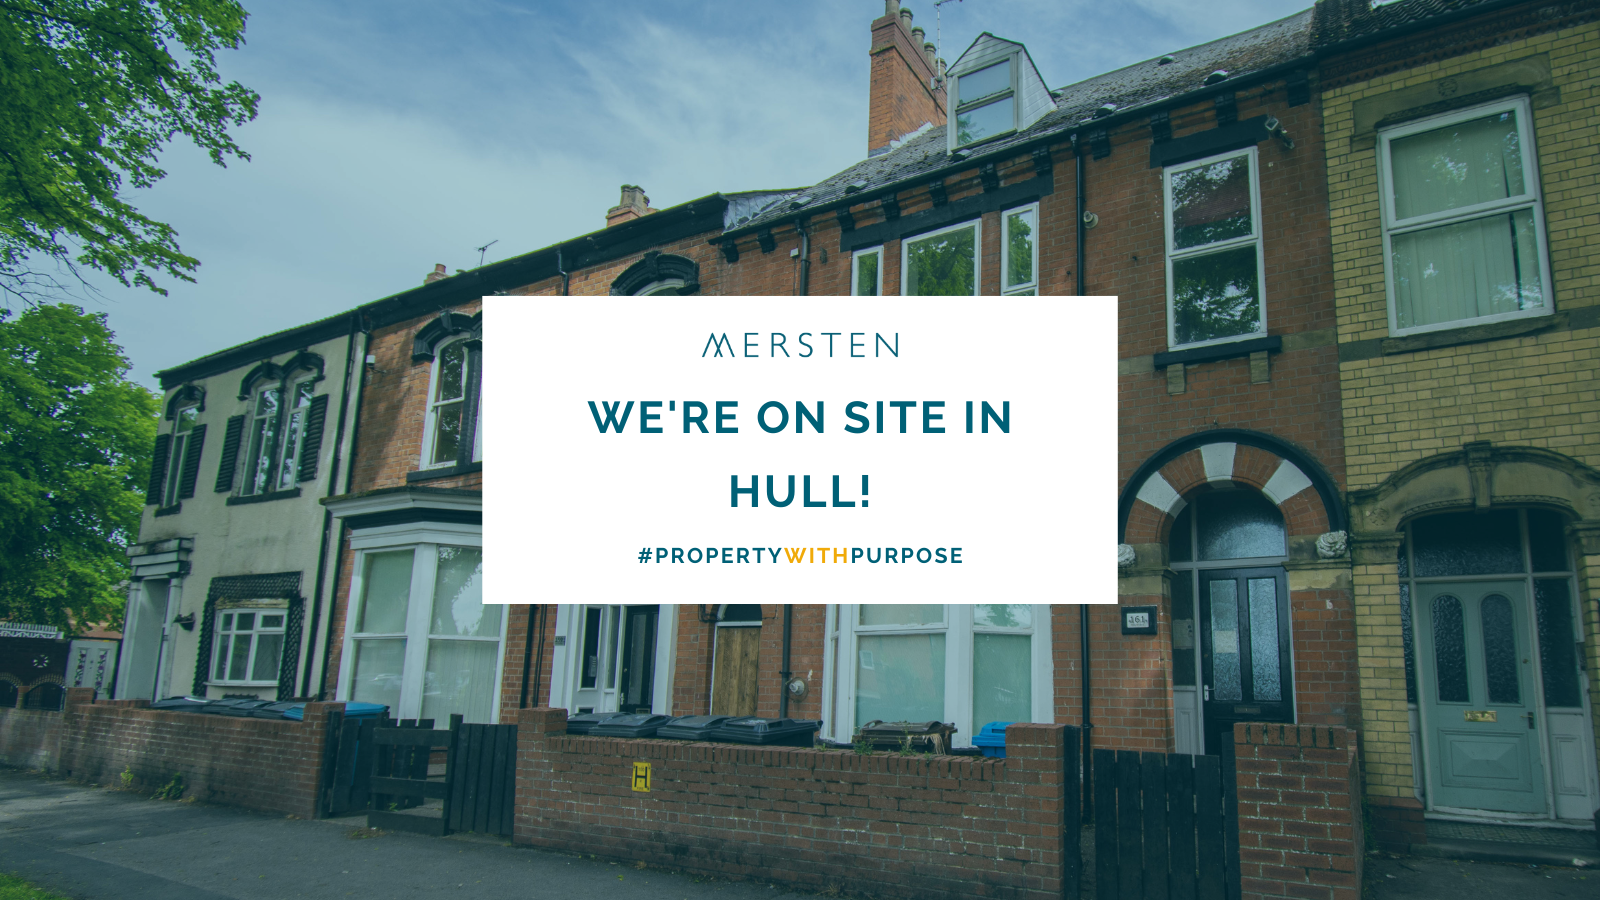 An image of a row of bricked terraced houses with a text box in the centre reading "we're on site in Hull, #propertywithpurpose"